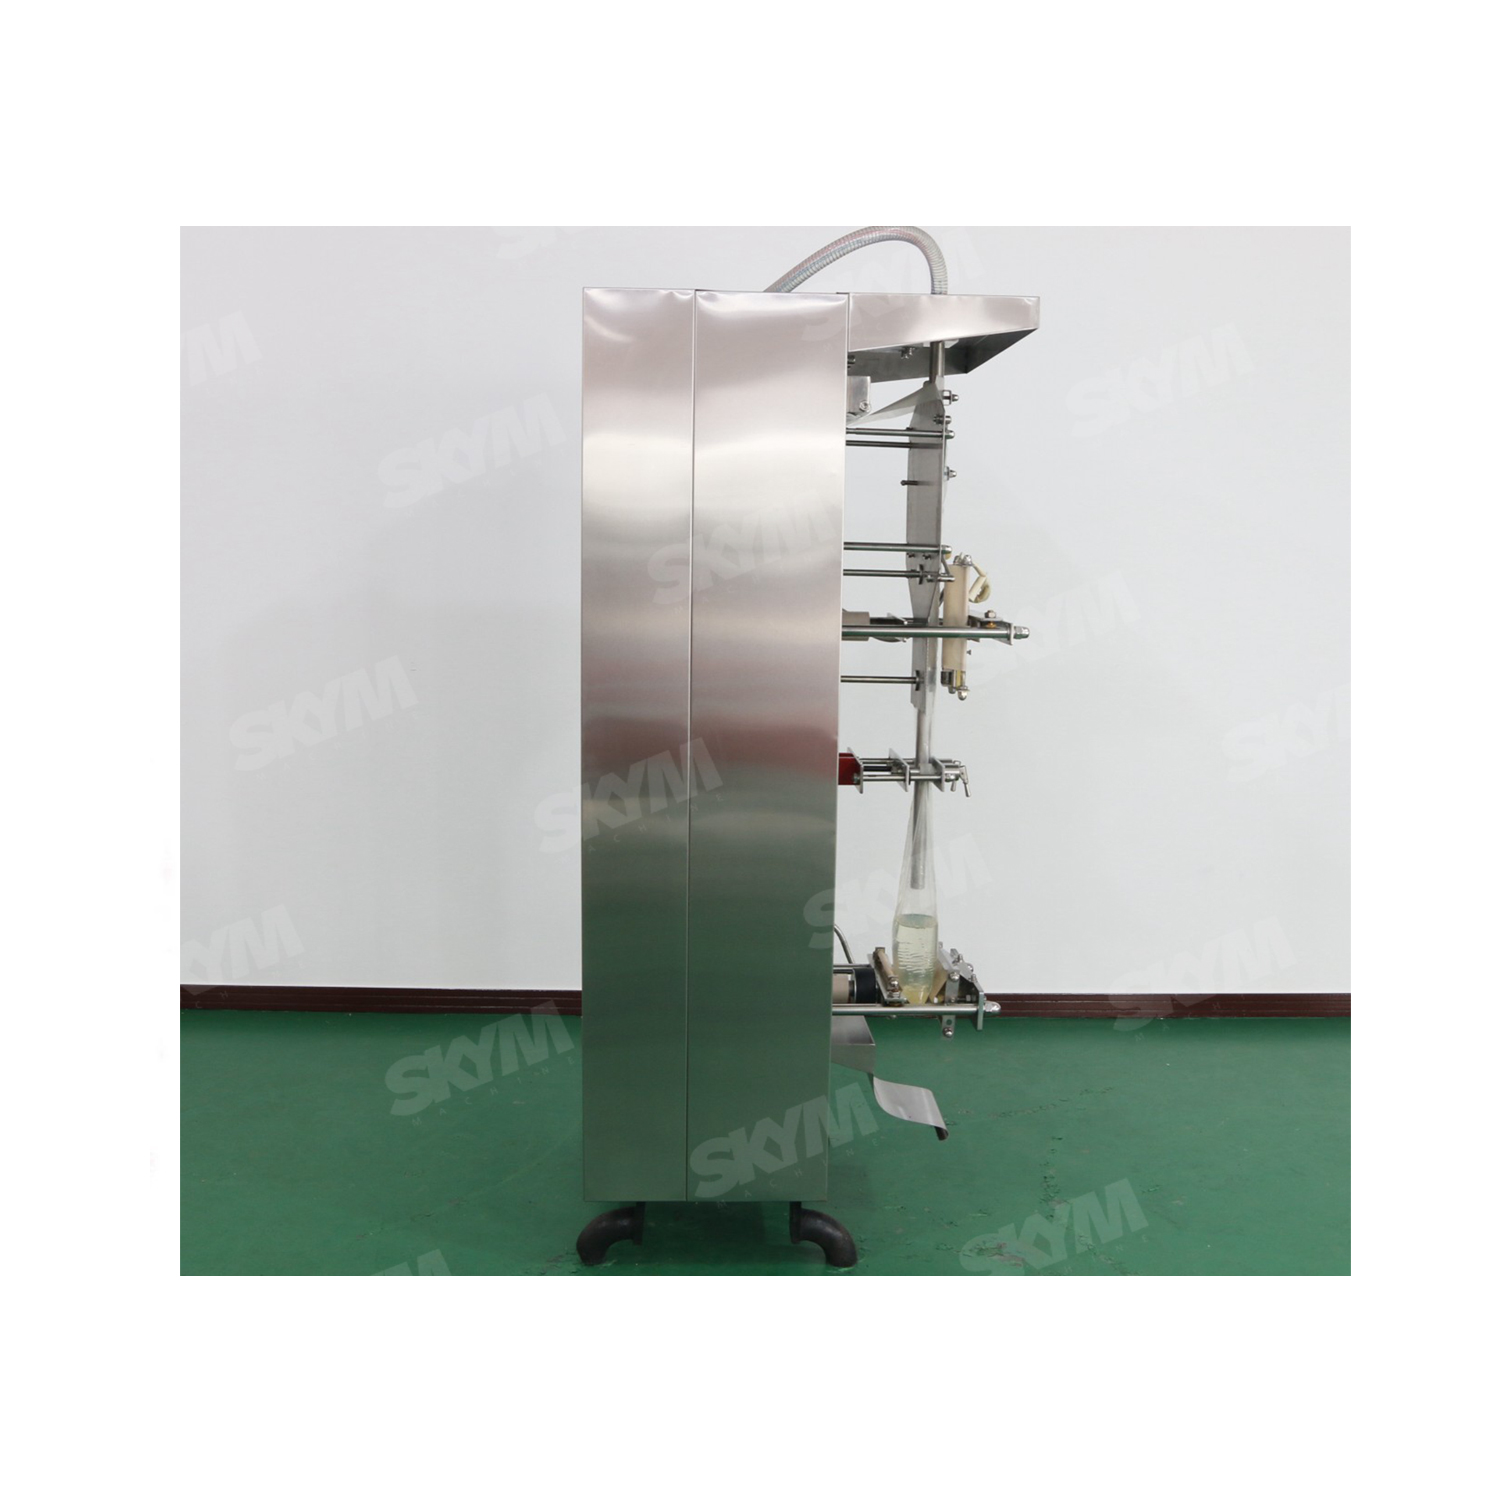 Industrial Water/soy Milk Pouch Packing Machine